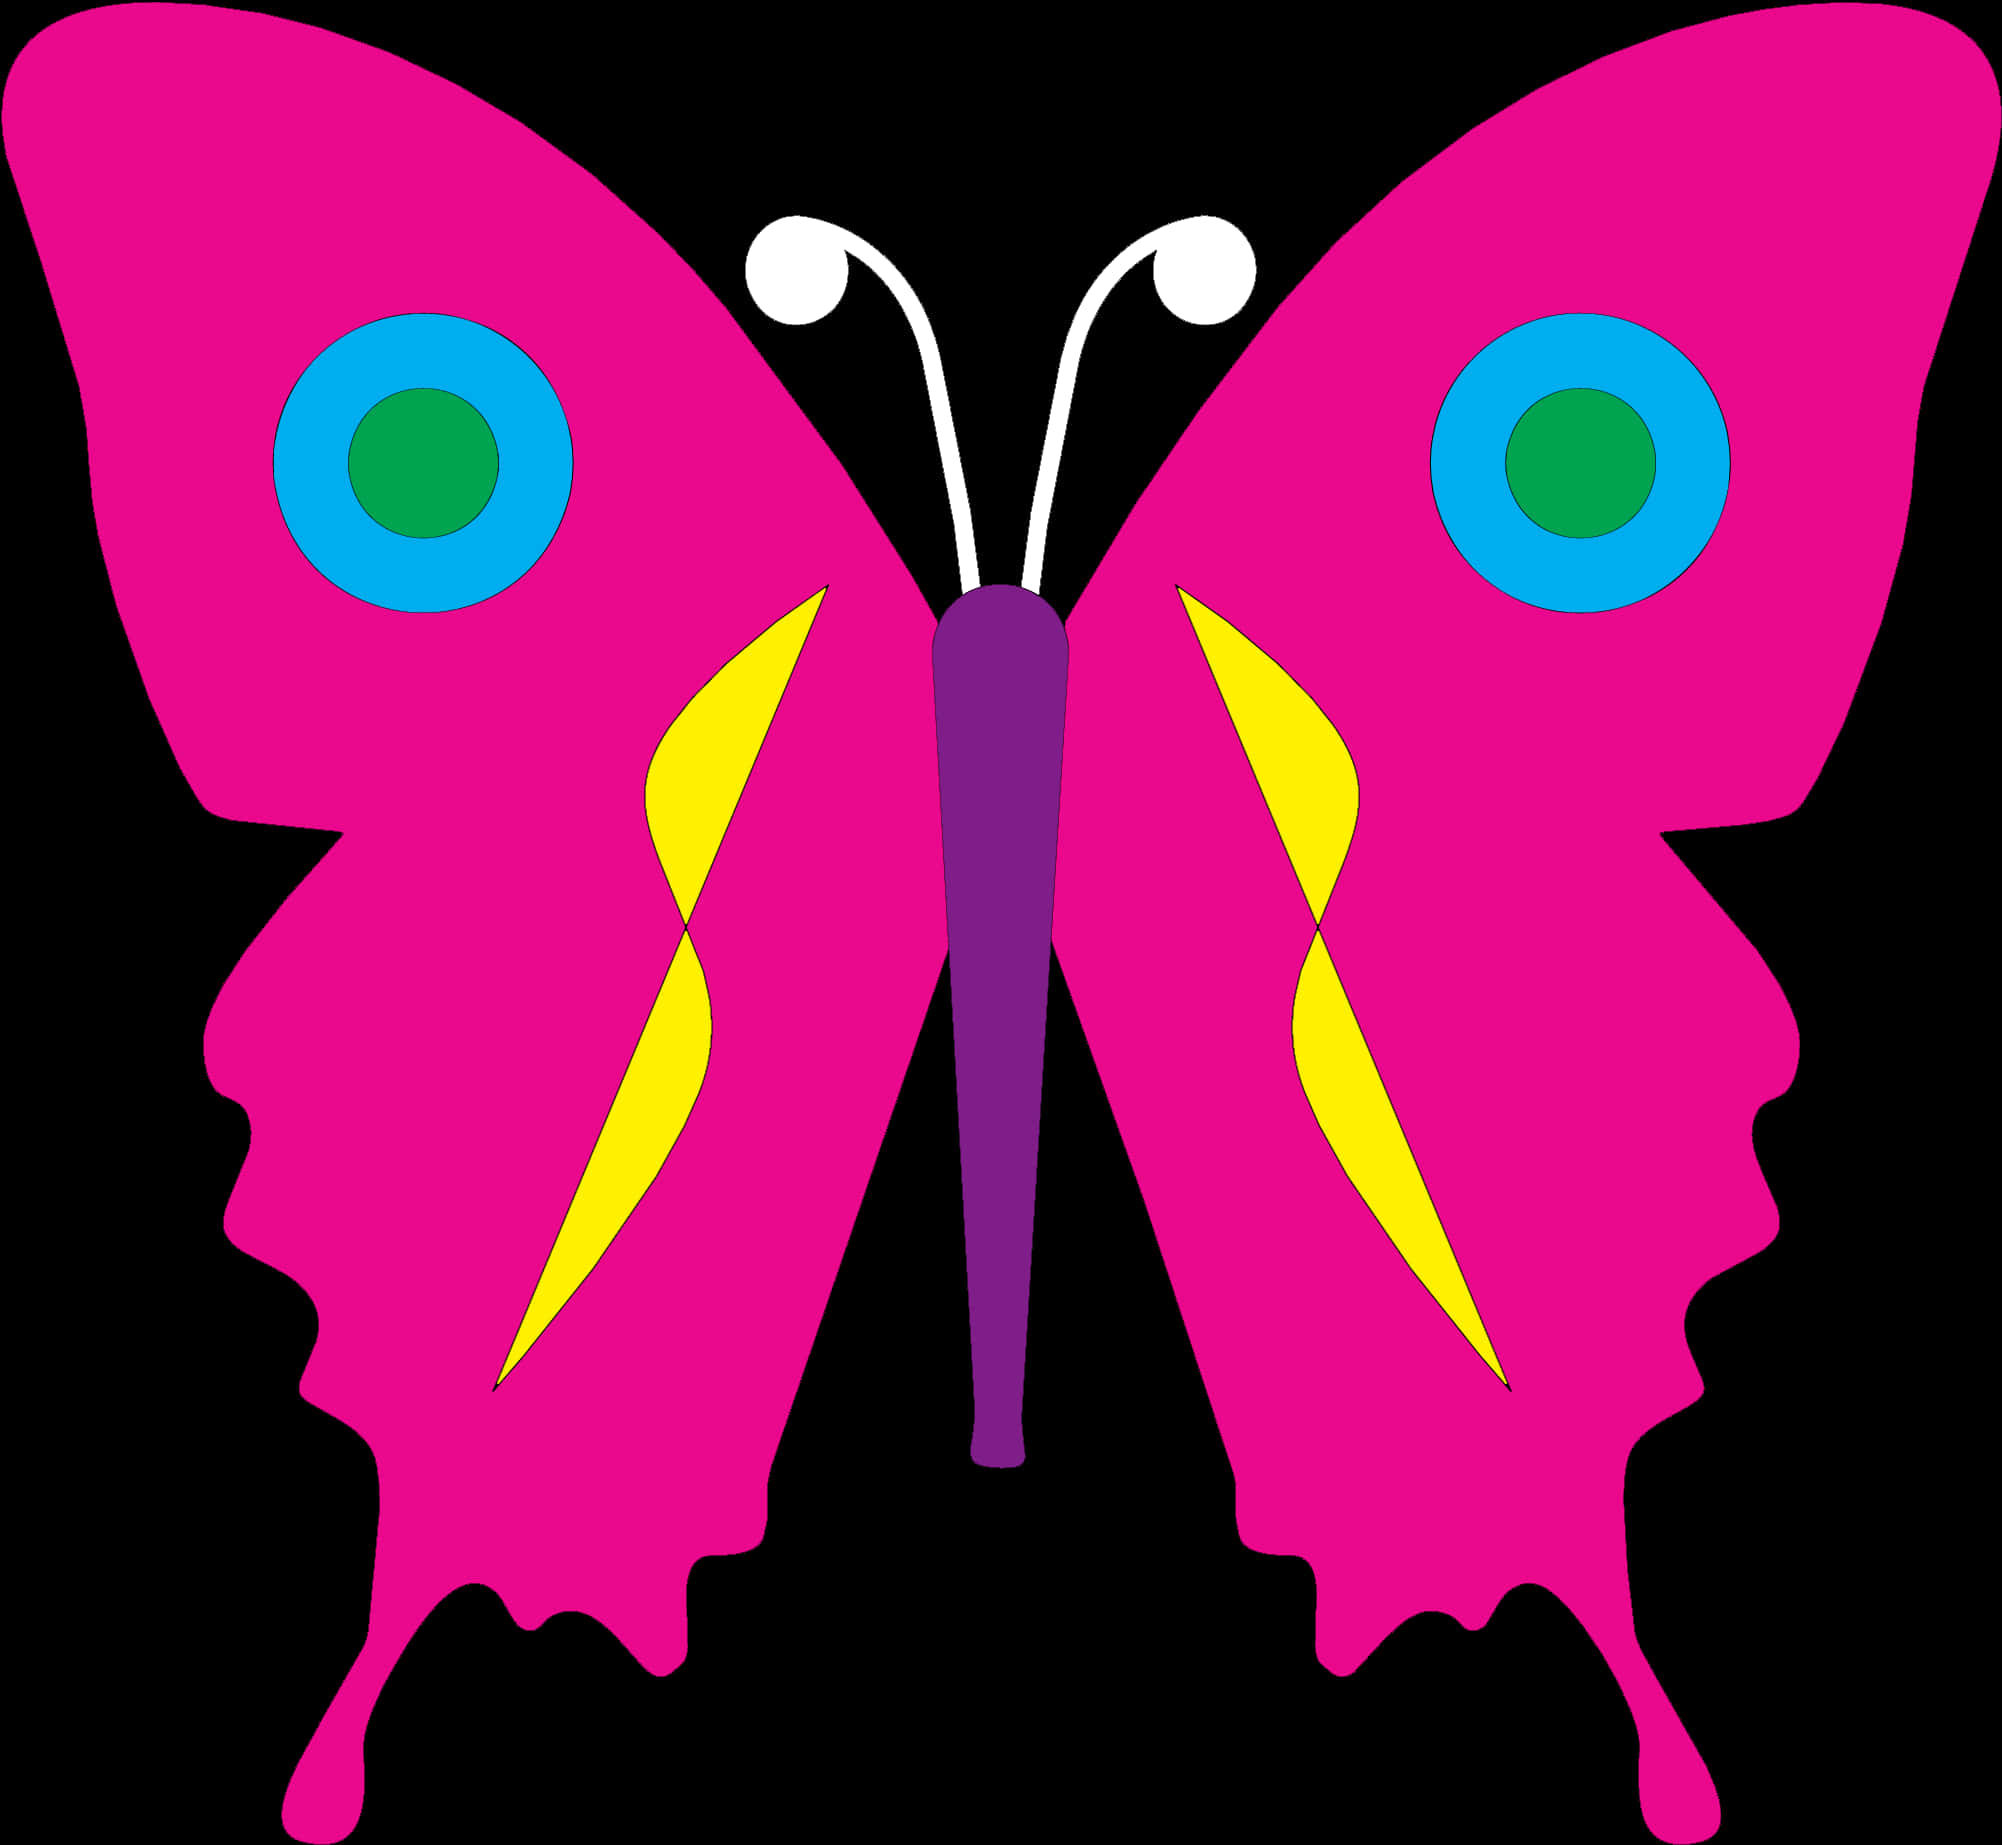 A Pink Butterfly With Yellow And Blue Spots